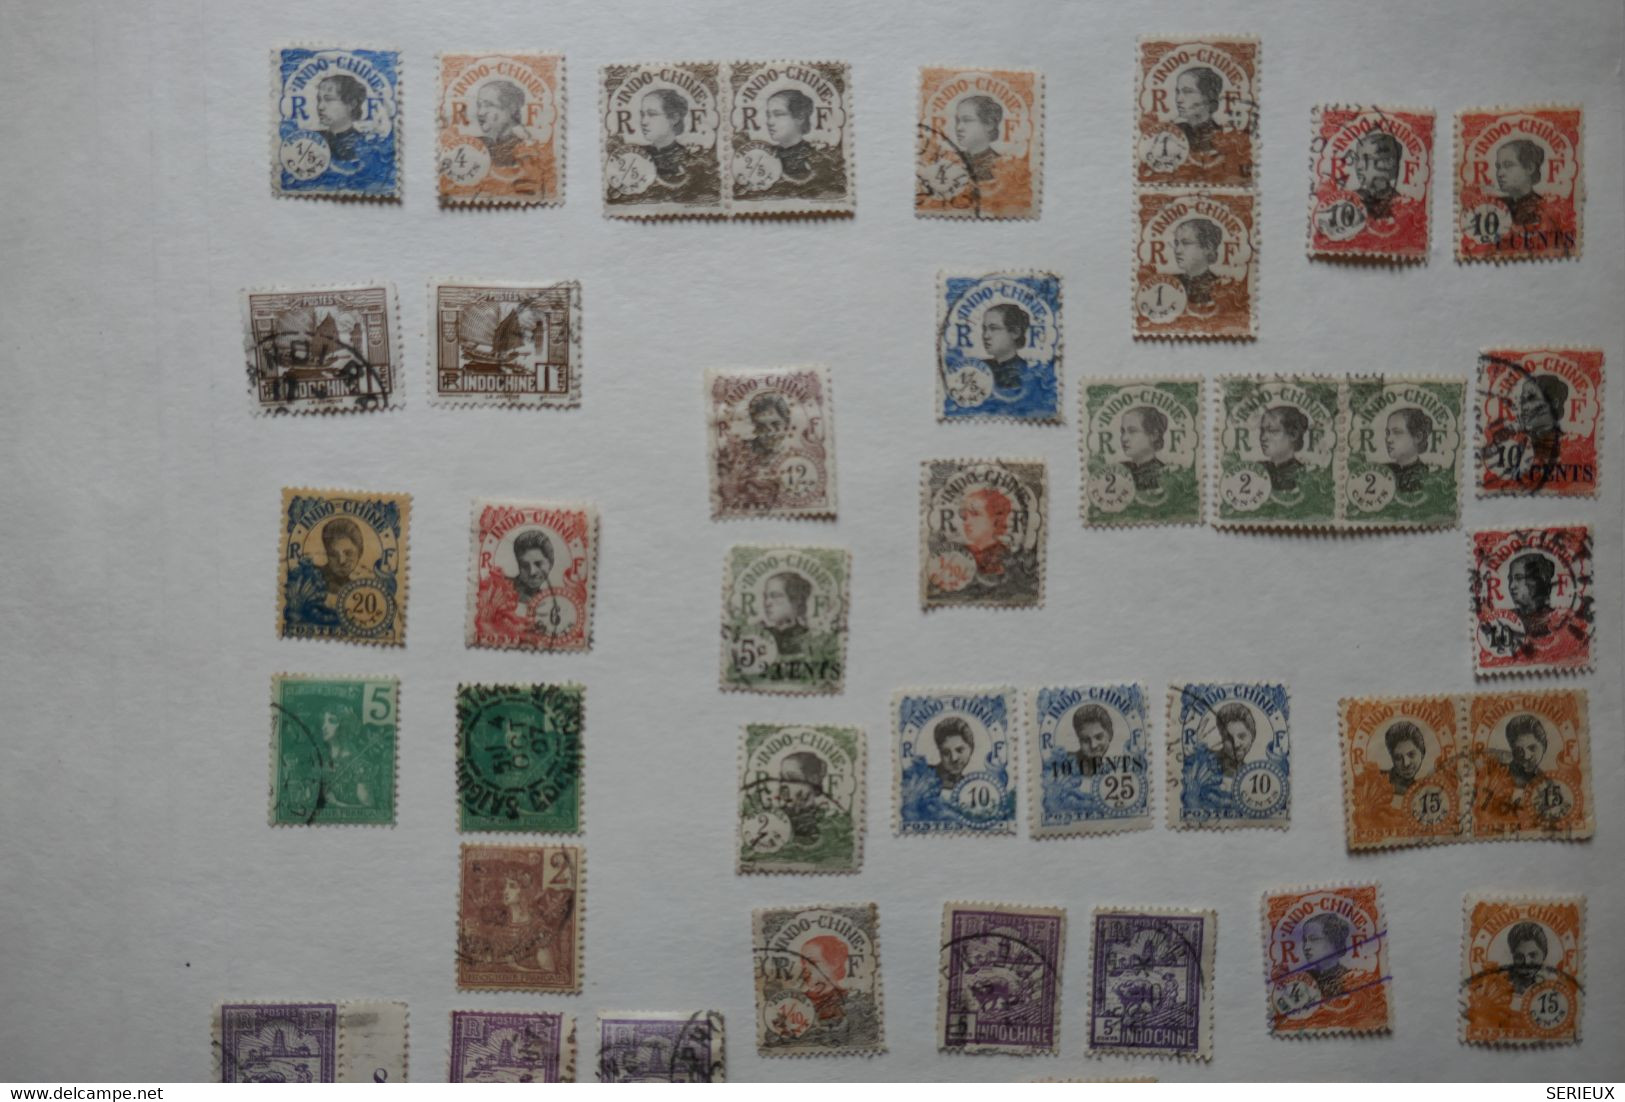 ¤3 INDO CHINA  1930  PAGE DE  TIMBRES DIVERS. SURCHARGES  +OBLITERATIONS DIVERSES A VOIR - Gebraucht